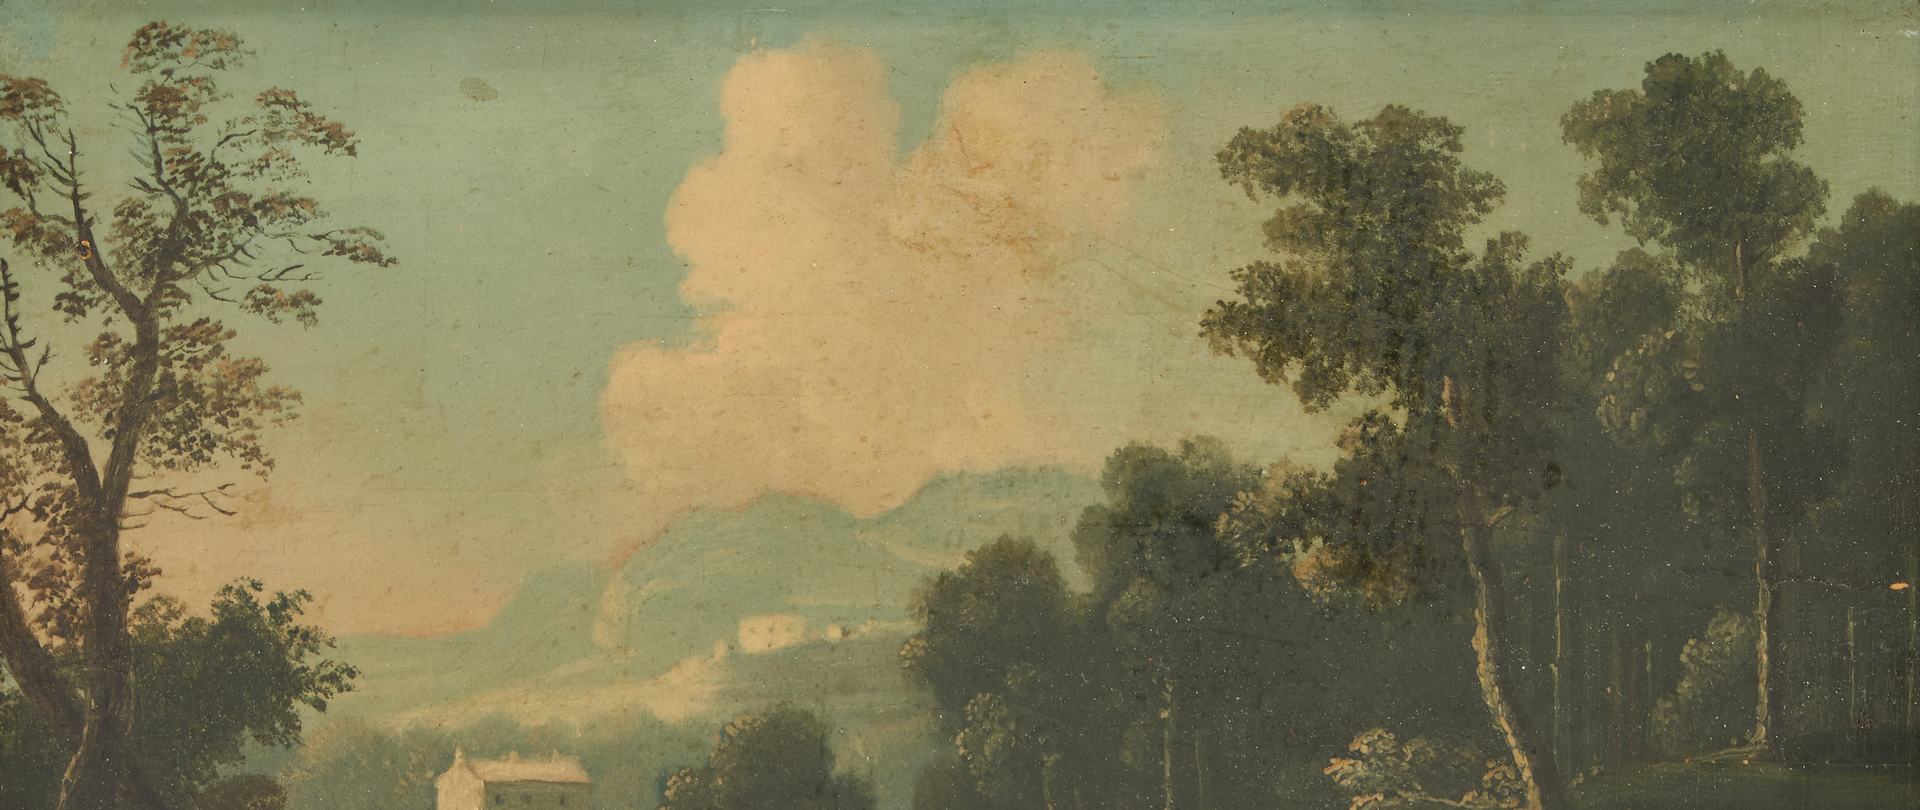 Lot 259: Style of Jan Wyck, Pair of O/B Landscapes